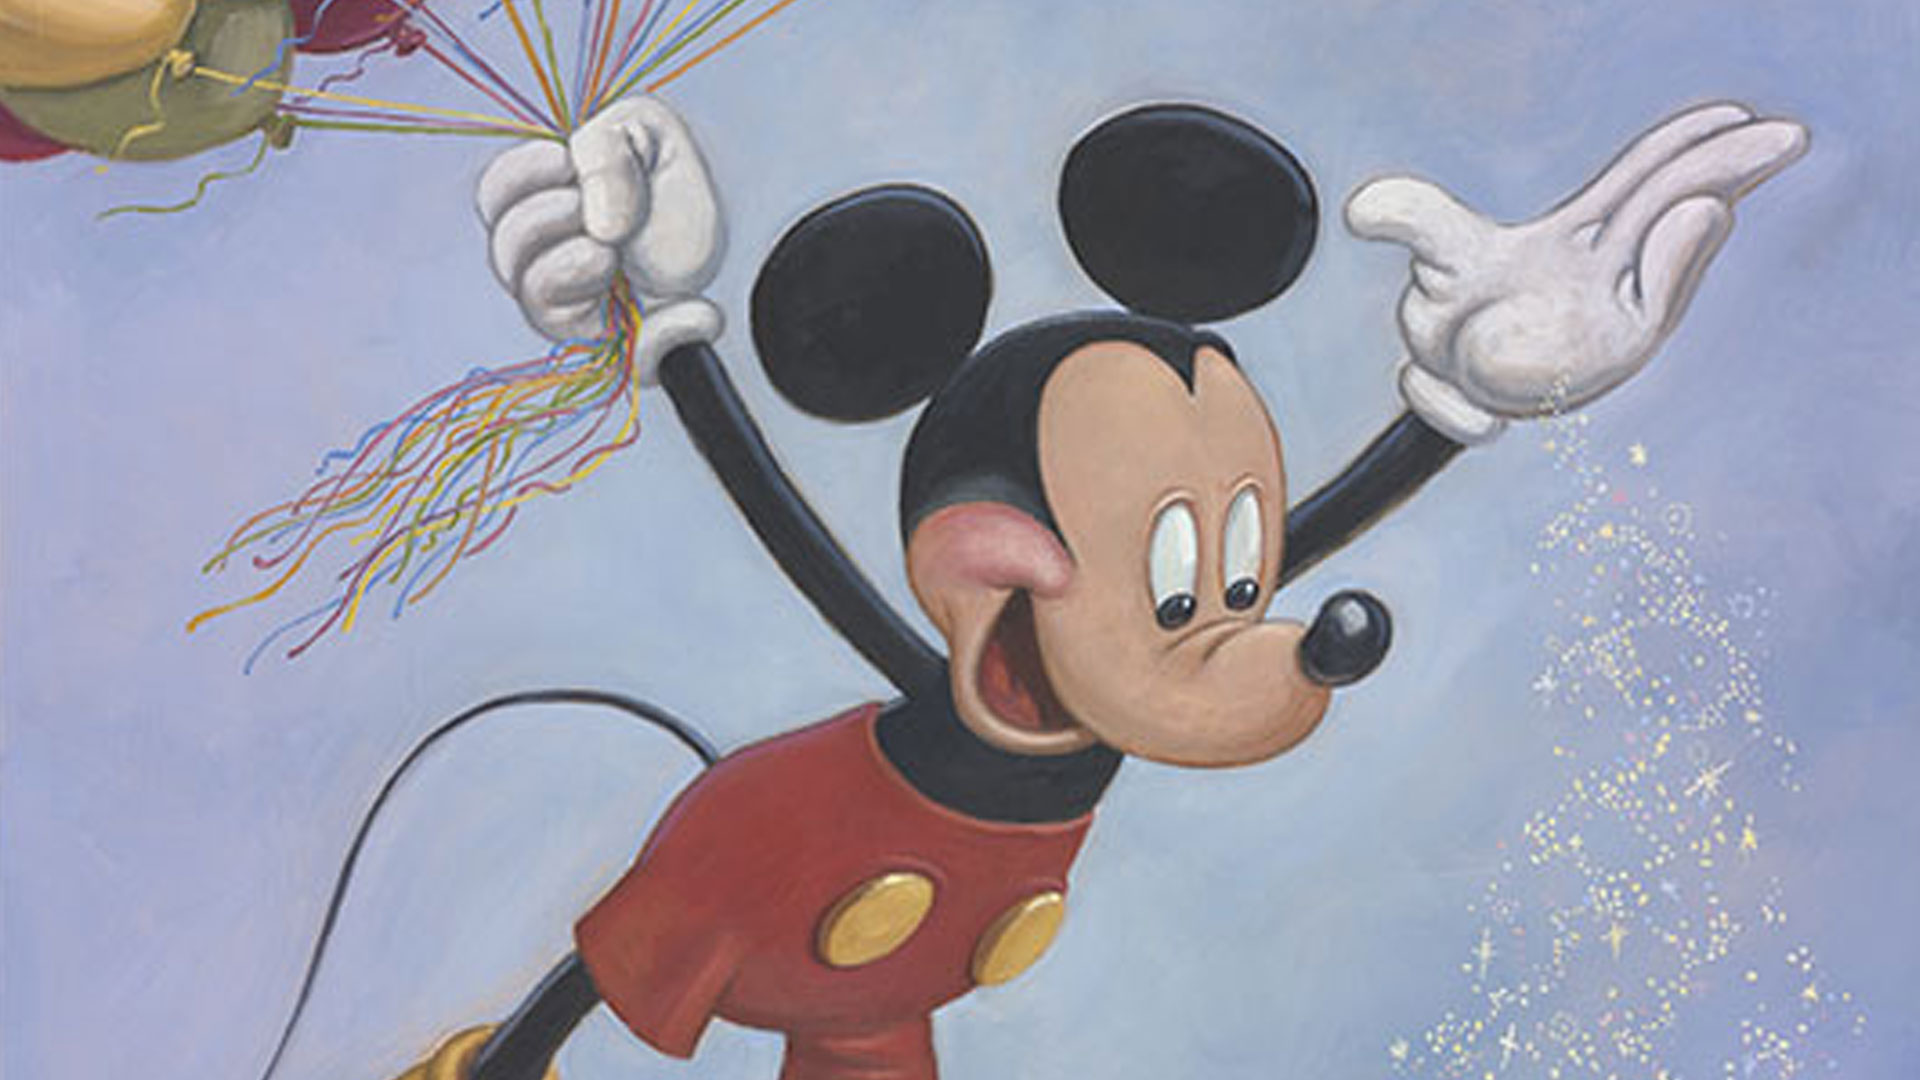 Mickey Mouse Continues to Spread Happiness Around the World in 90th Anniversary Portrait